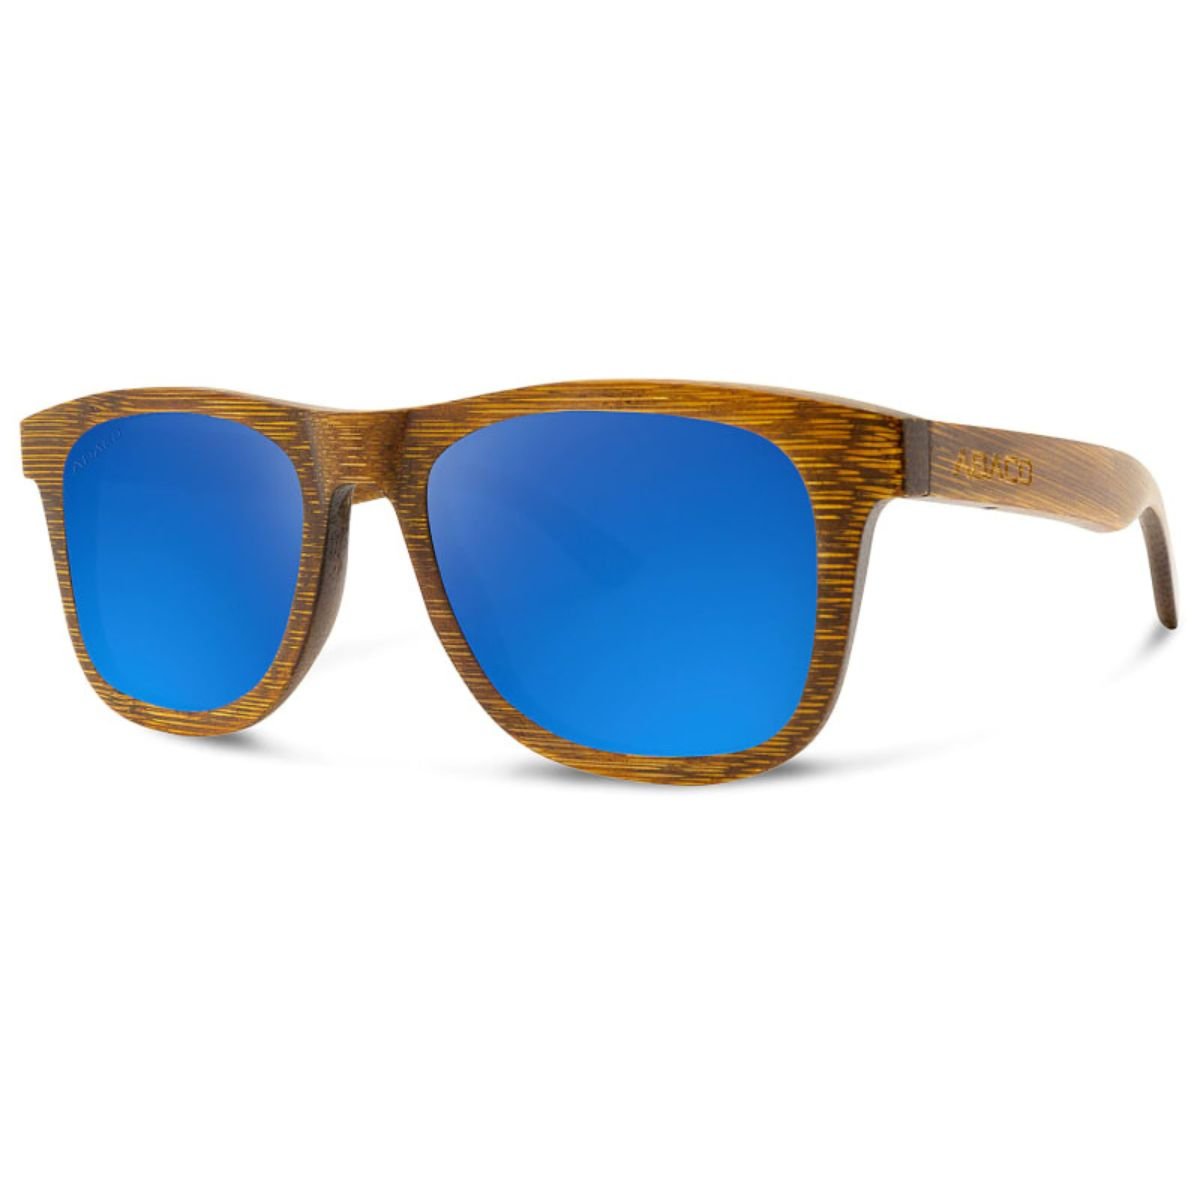 Oliver Peoples 53 mm Deep Blue Sunglasses | World of Watches